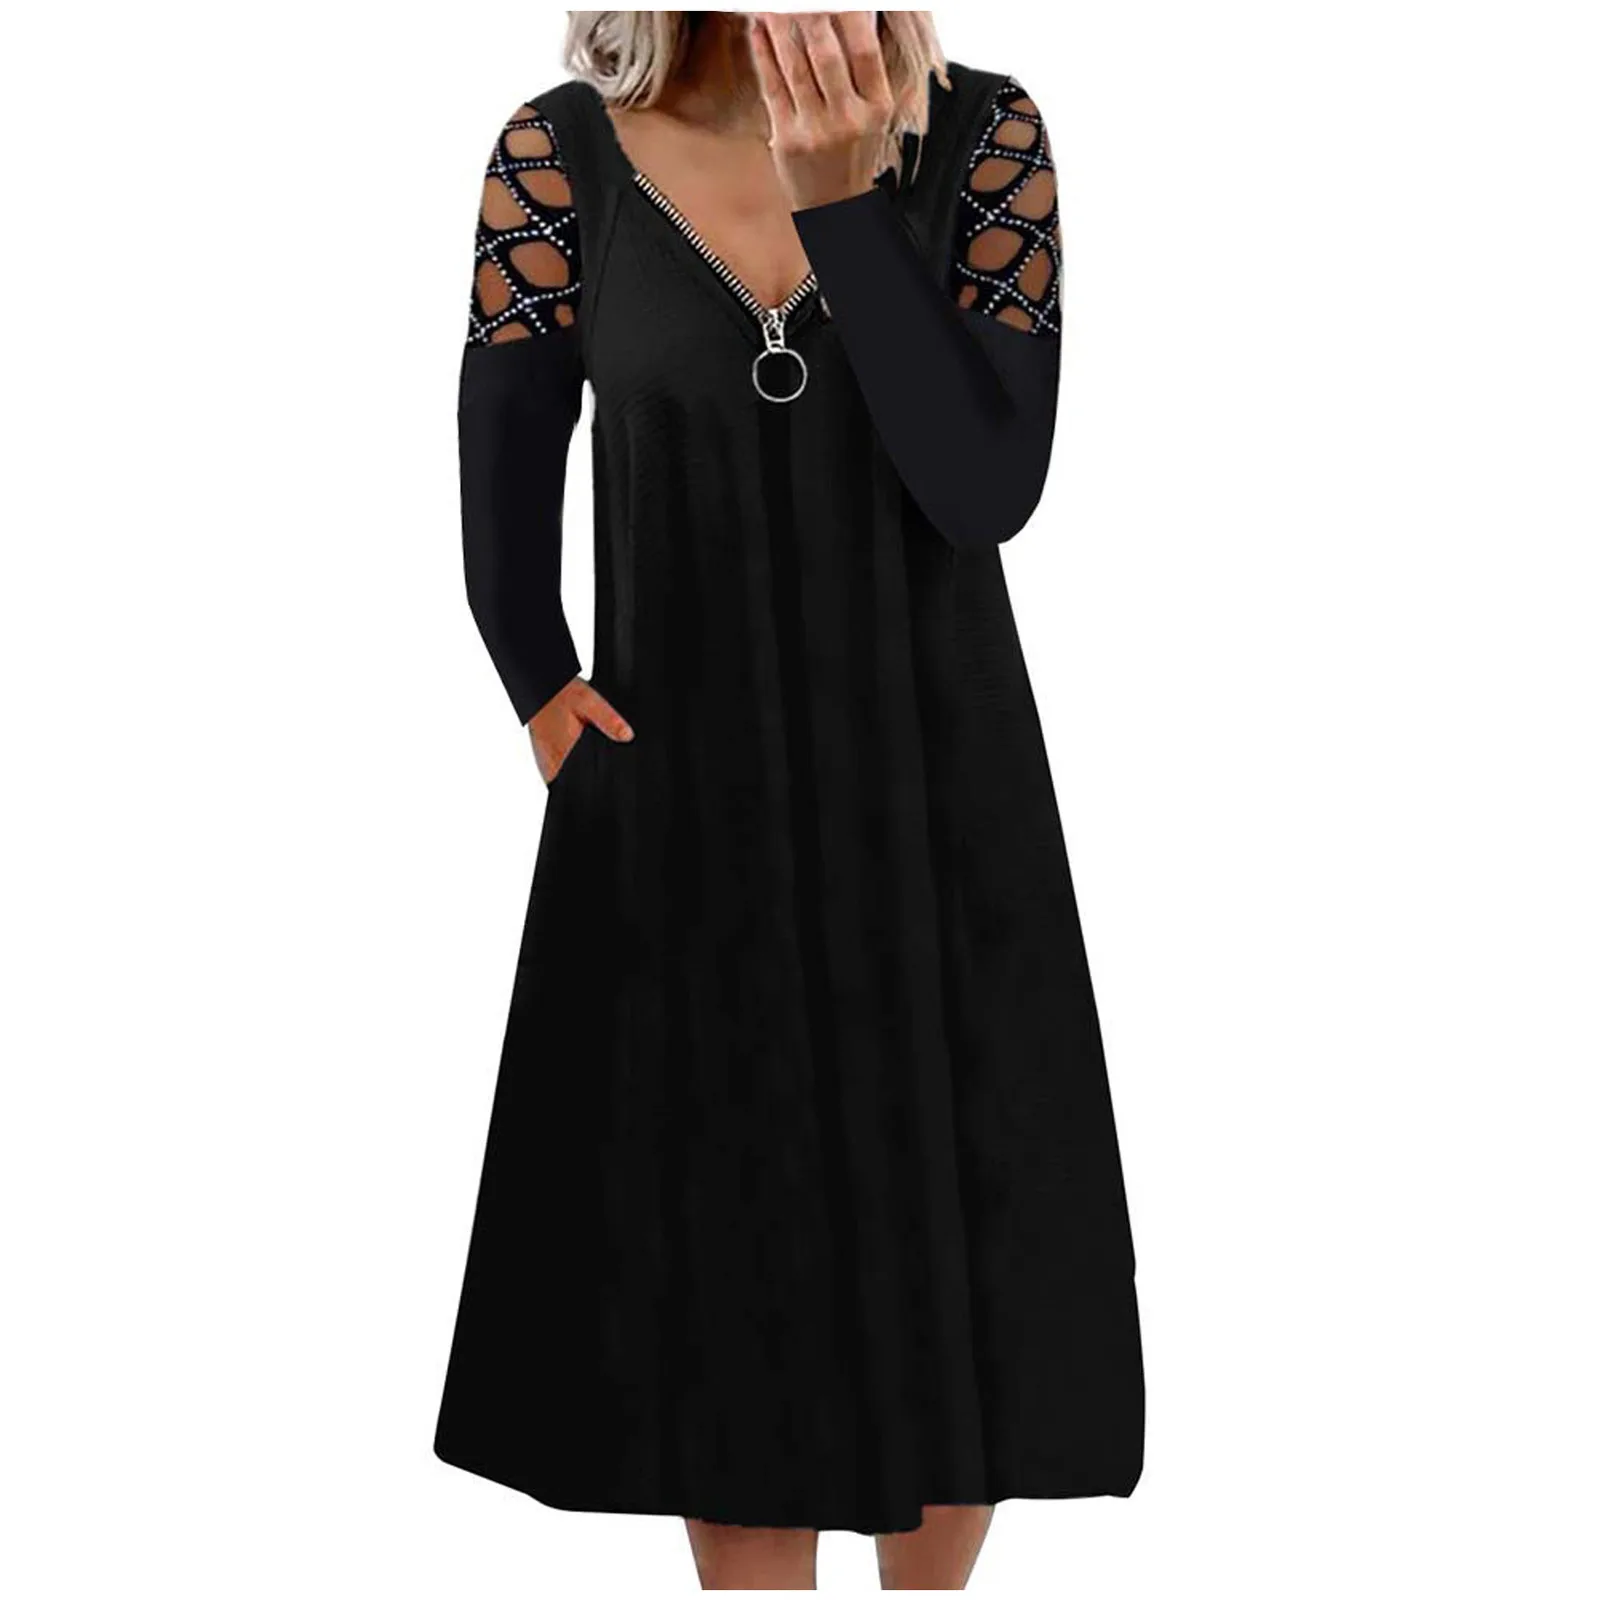 

Fashion Women's Sexy V-neck Solid Color Hollow Long Sleeve Midi Dresses Hot Rhinestone Casual Dress Ropa Mujer Robe Femme Платье